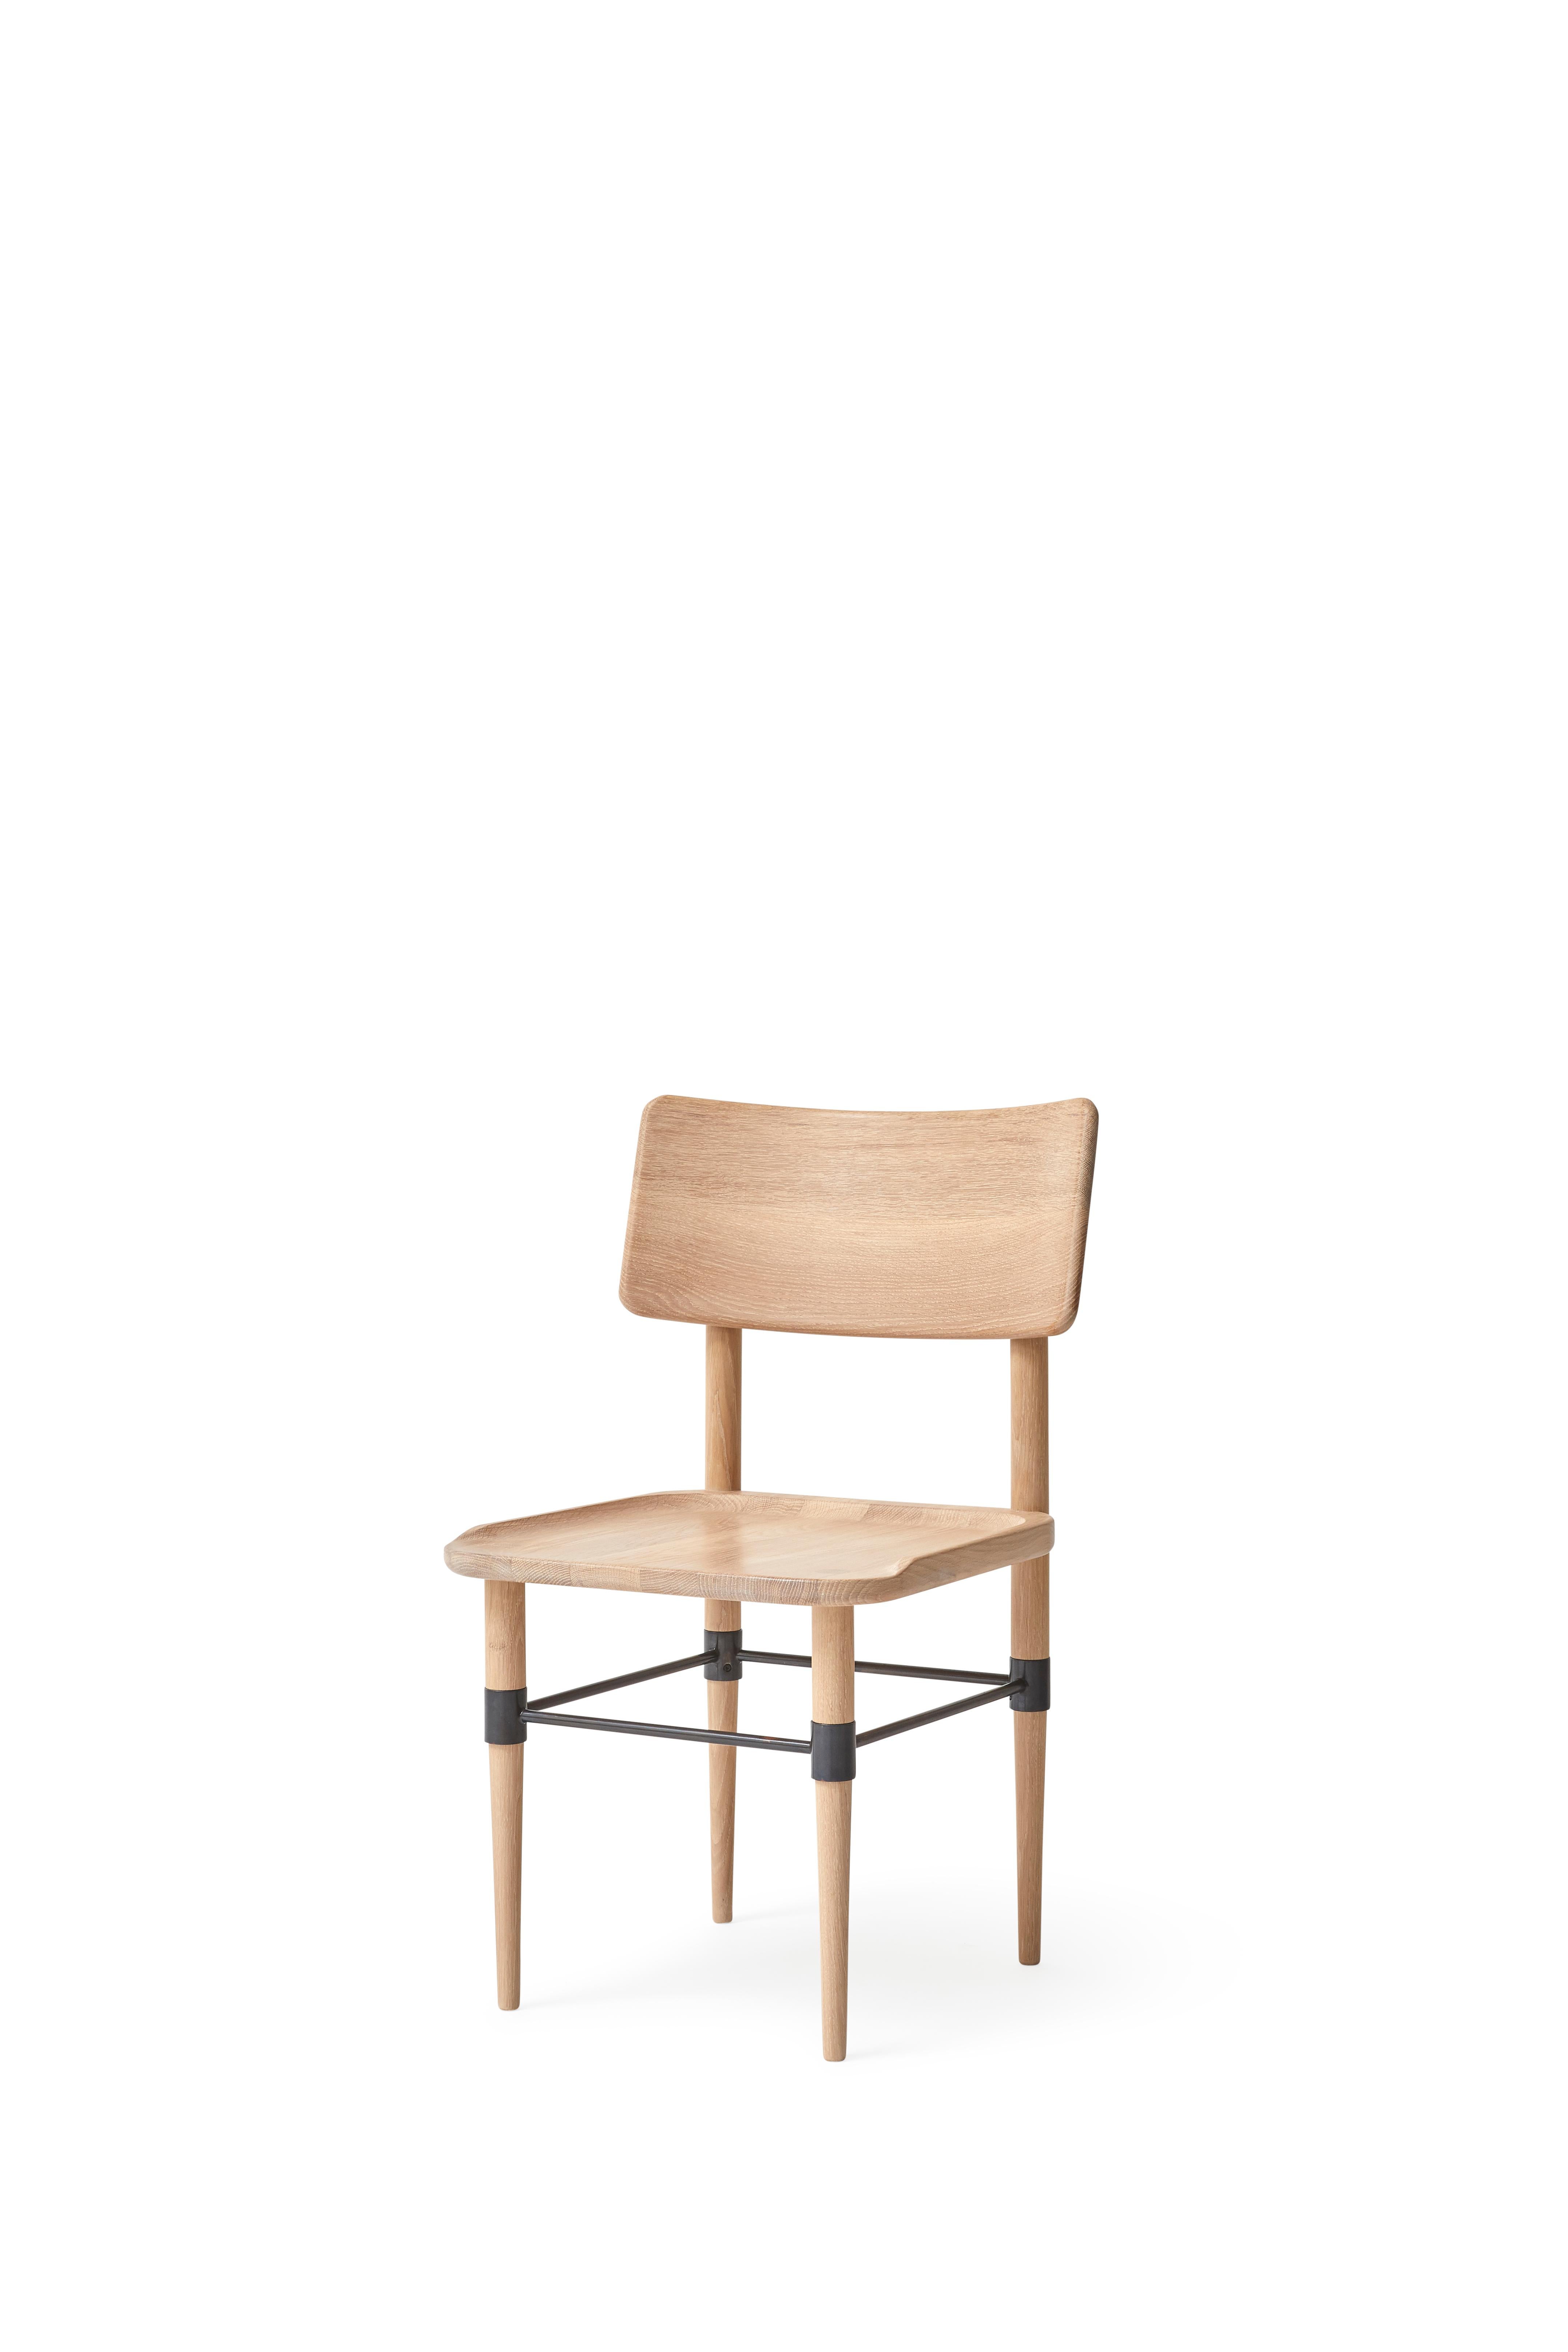 MG101 Dining chair in Light Nature oak and blackened metal. The seat pad is not included and can be ordered seperately.

The Holmen series originates in a series of furniture, which was developed for Michelin restaurant 108 in Copenhagen. The common